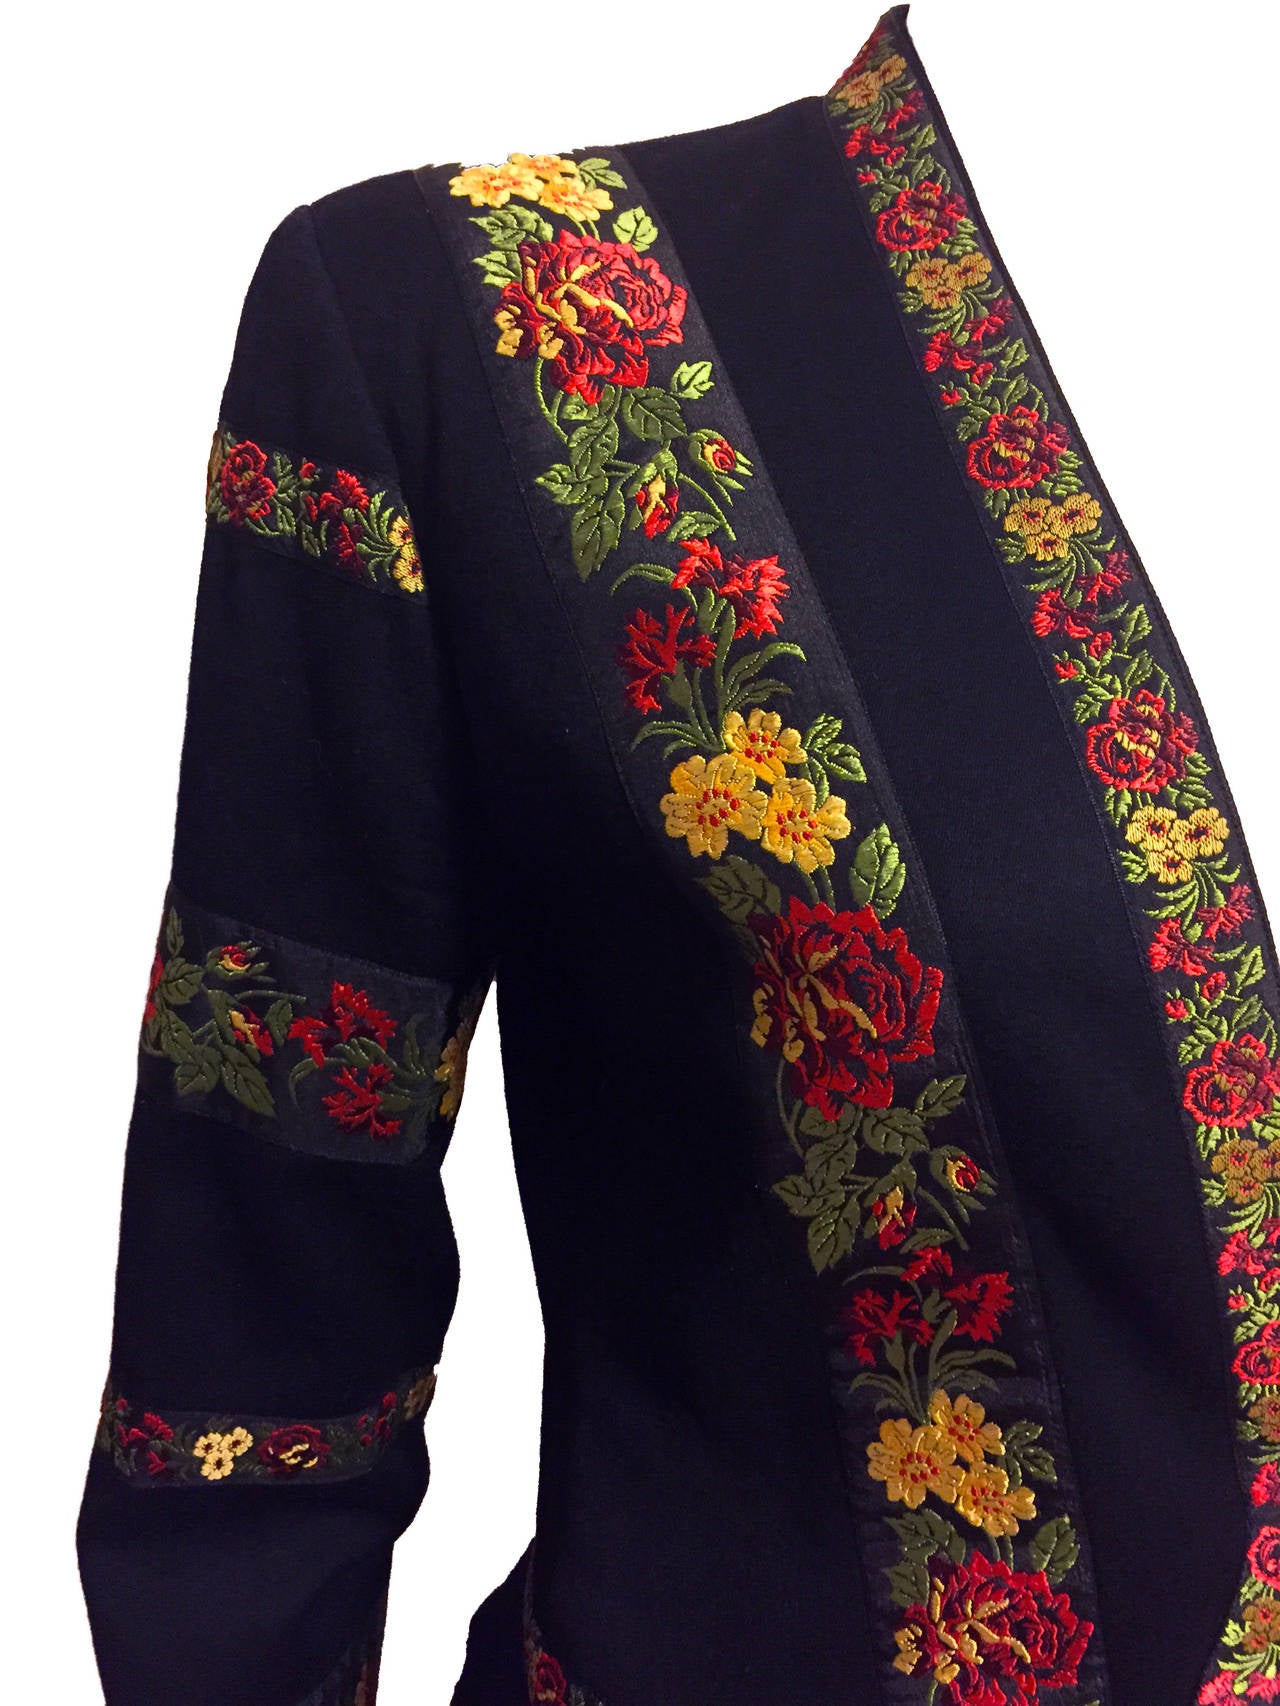 Beautiful vintage Kenzo skirt suit featuring a folkloric boho theme, with a black wool jacket with intricate floral embroidery and accompanying black lace skirt with lining from the 1970s. Jacket features single front button closure. Skirt has a